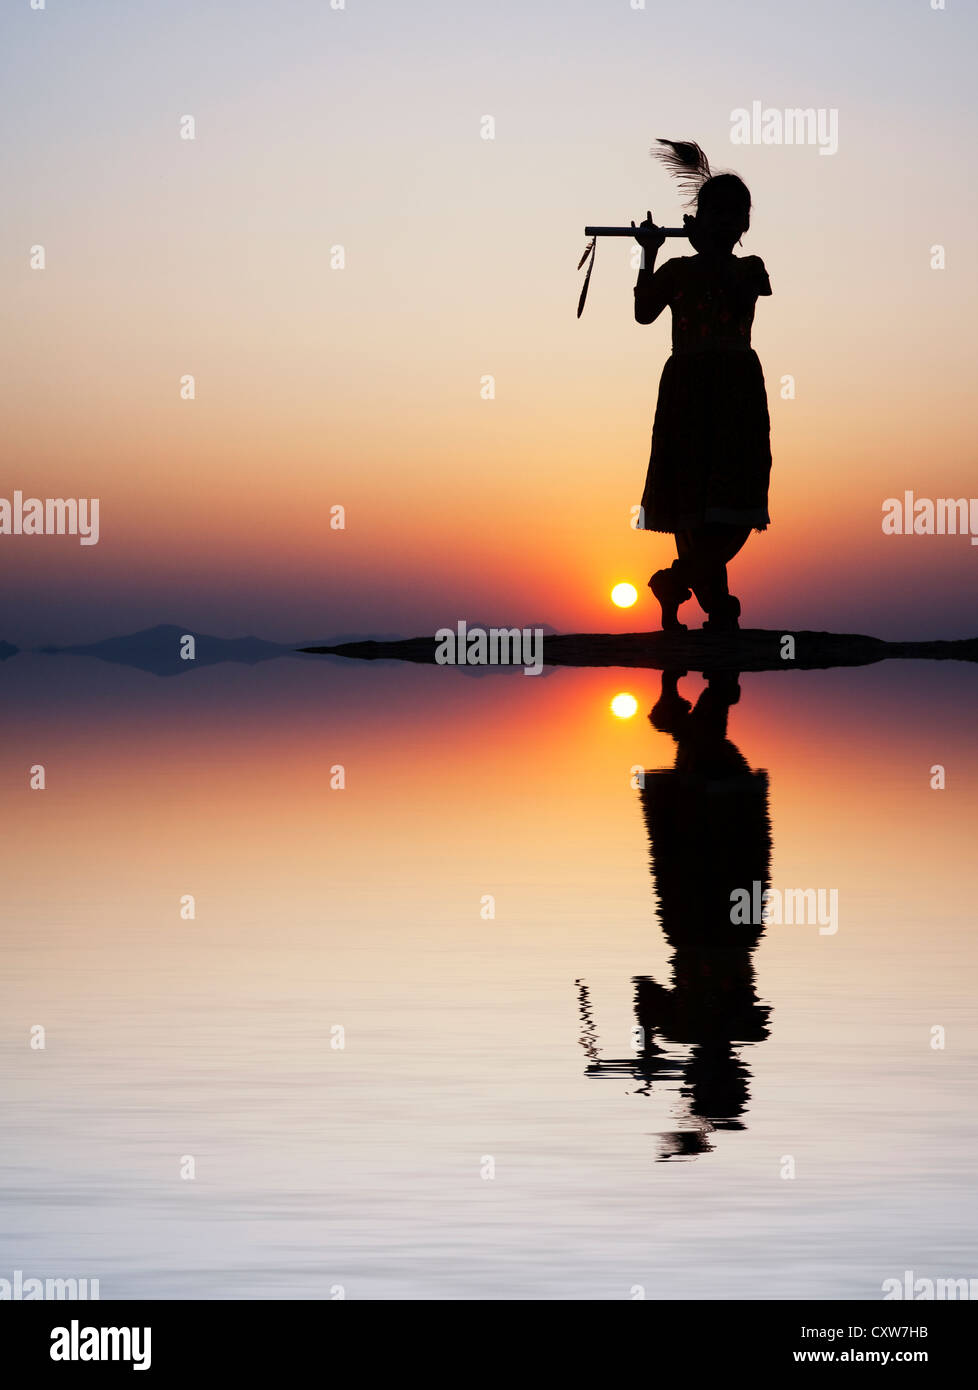 Silhouette of an Indian girl pretending to be Lord krishna at sunset with water reflection and ripples. India Stock Photo